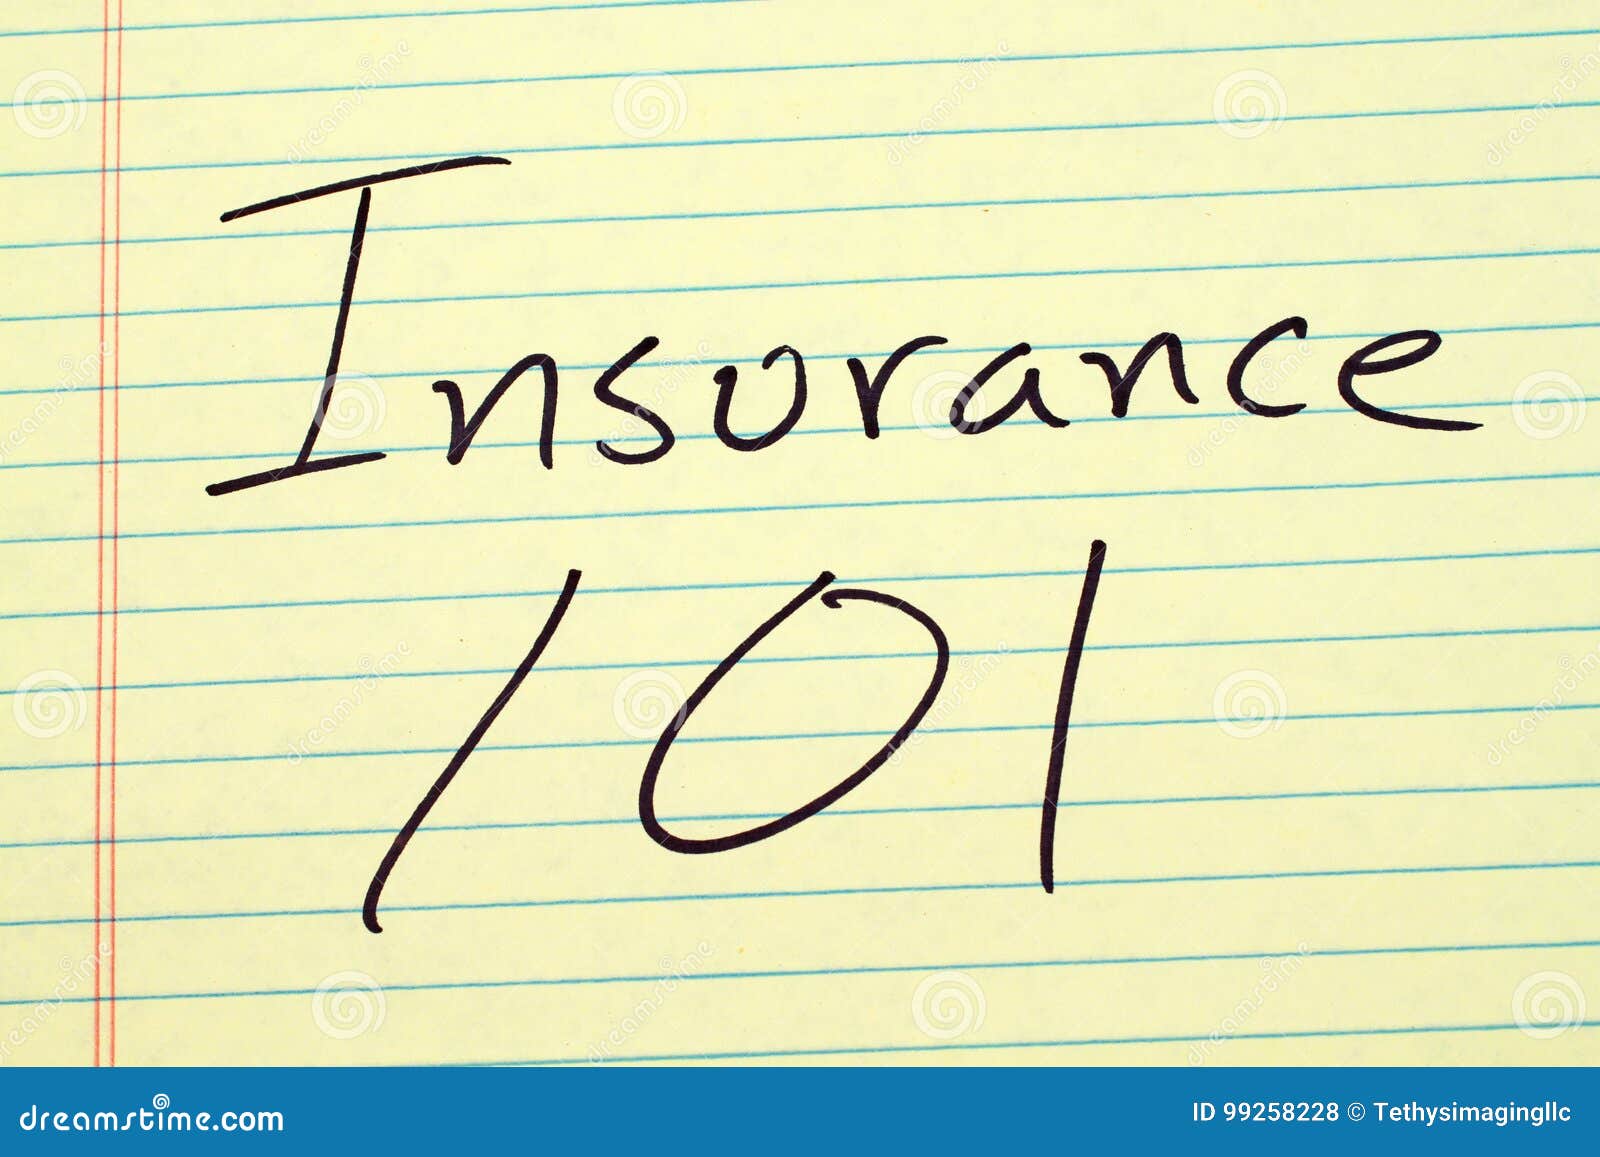 insurance 101 on a yellow legal pad